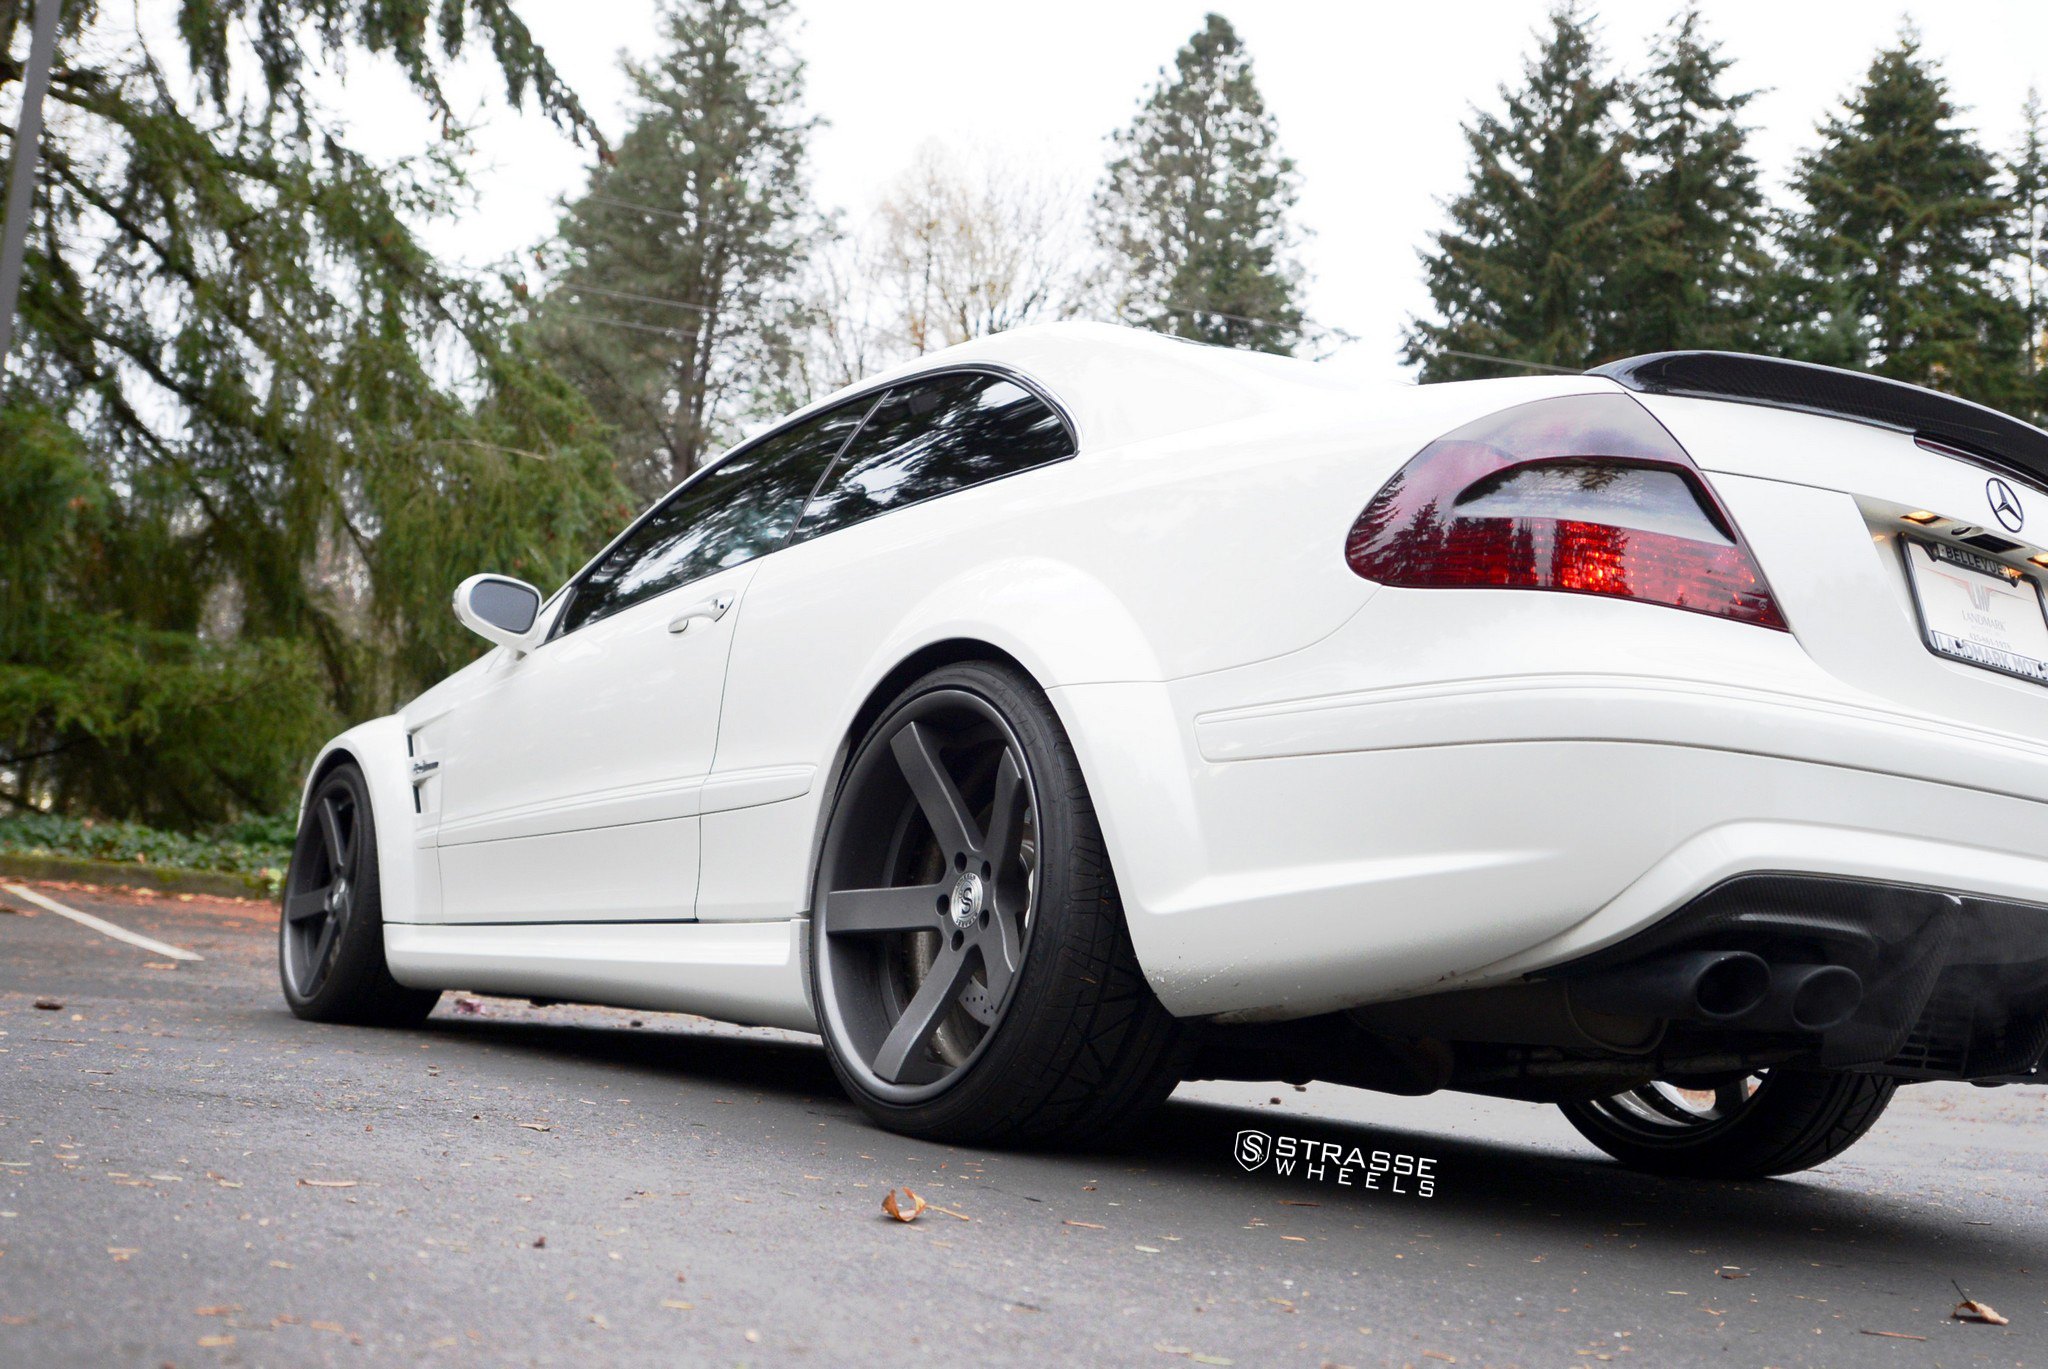 Aftermarket Rear Diffuser on White Mercedes CLK-Class - Photo by Strasse Forged